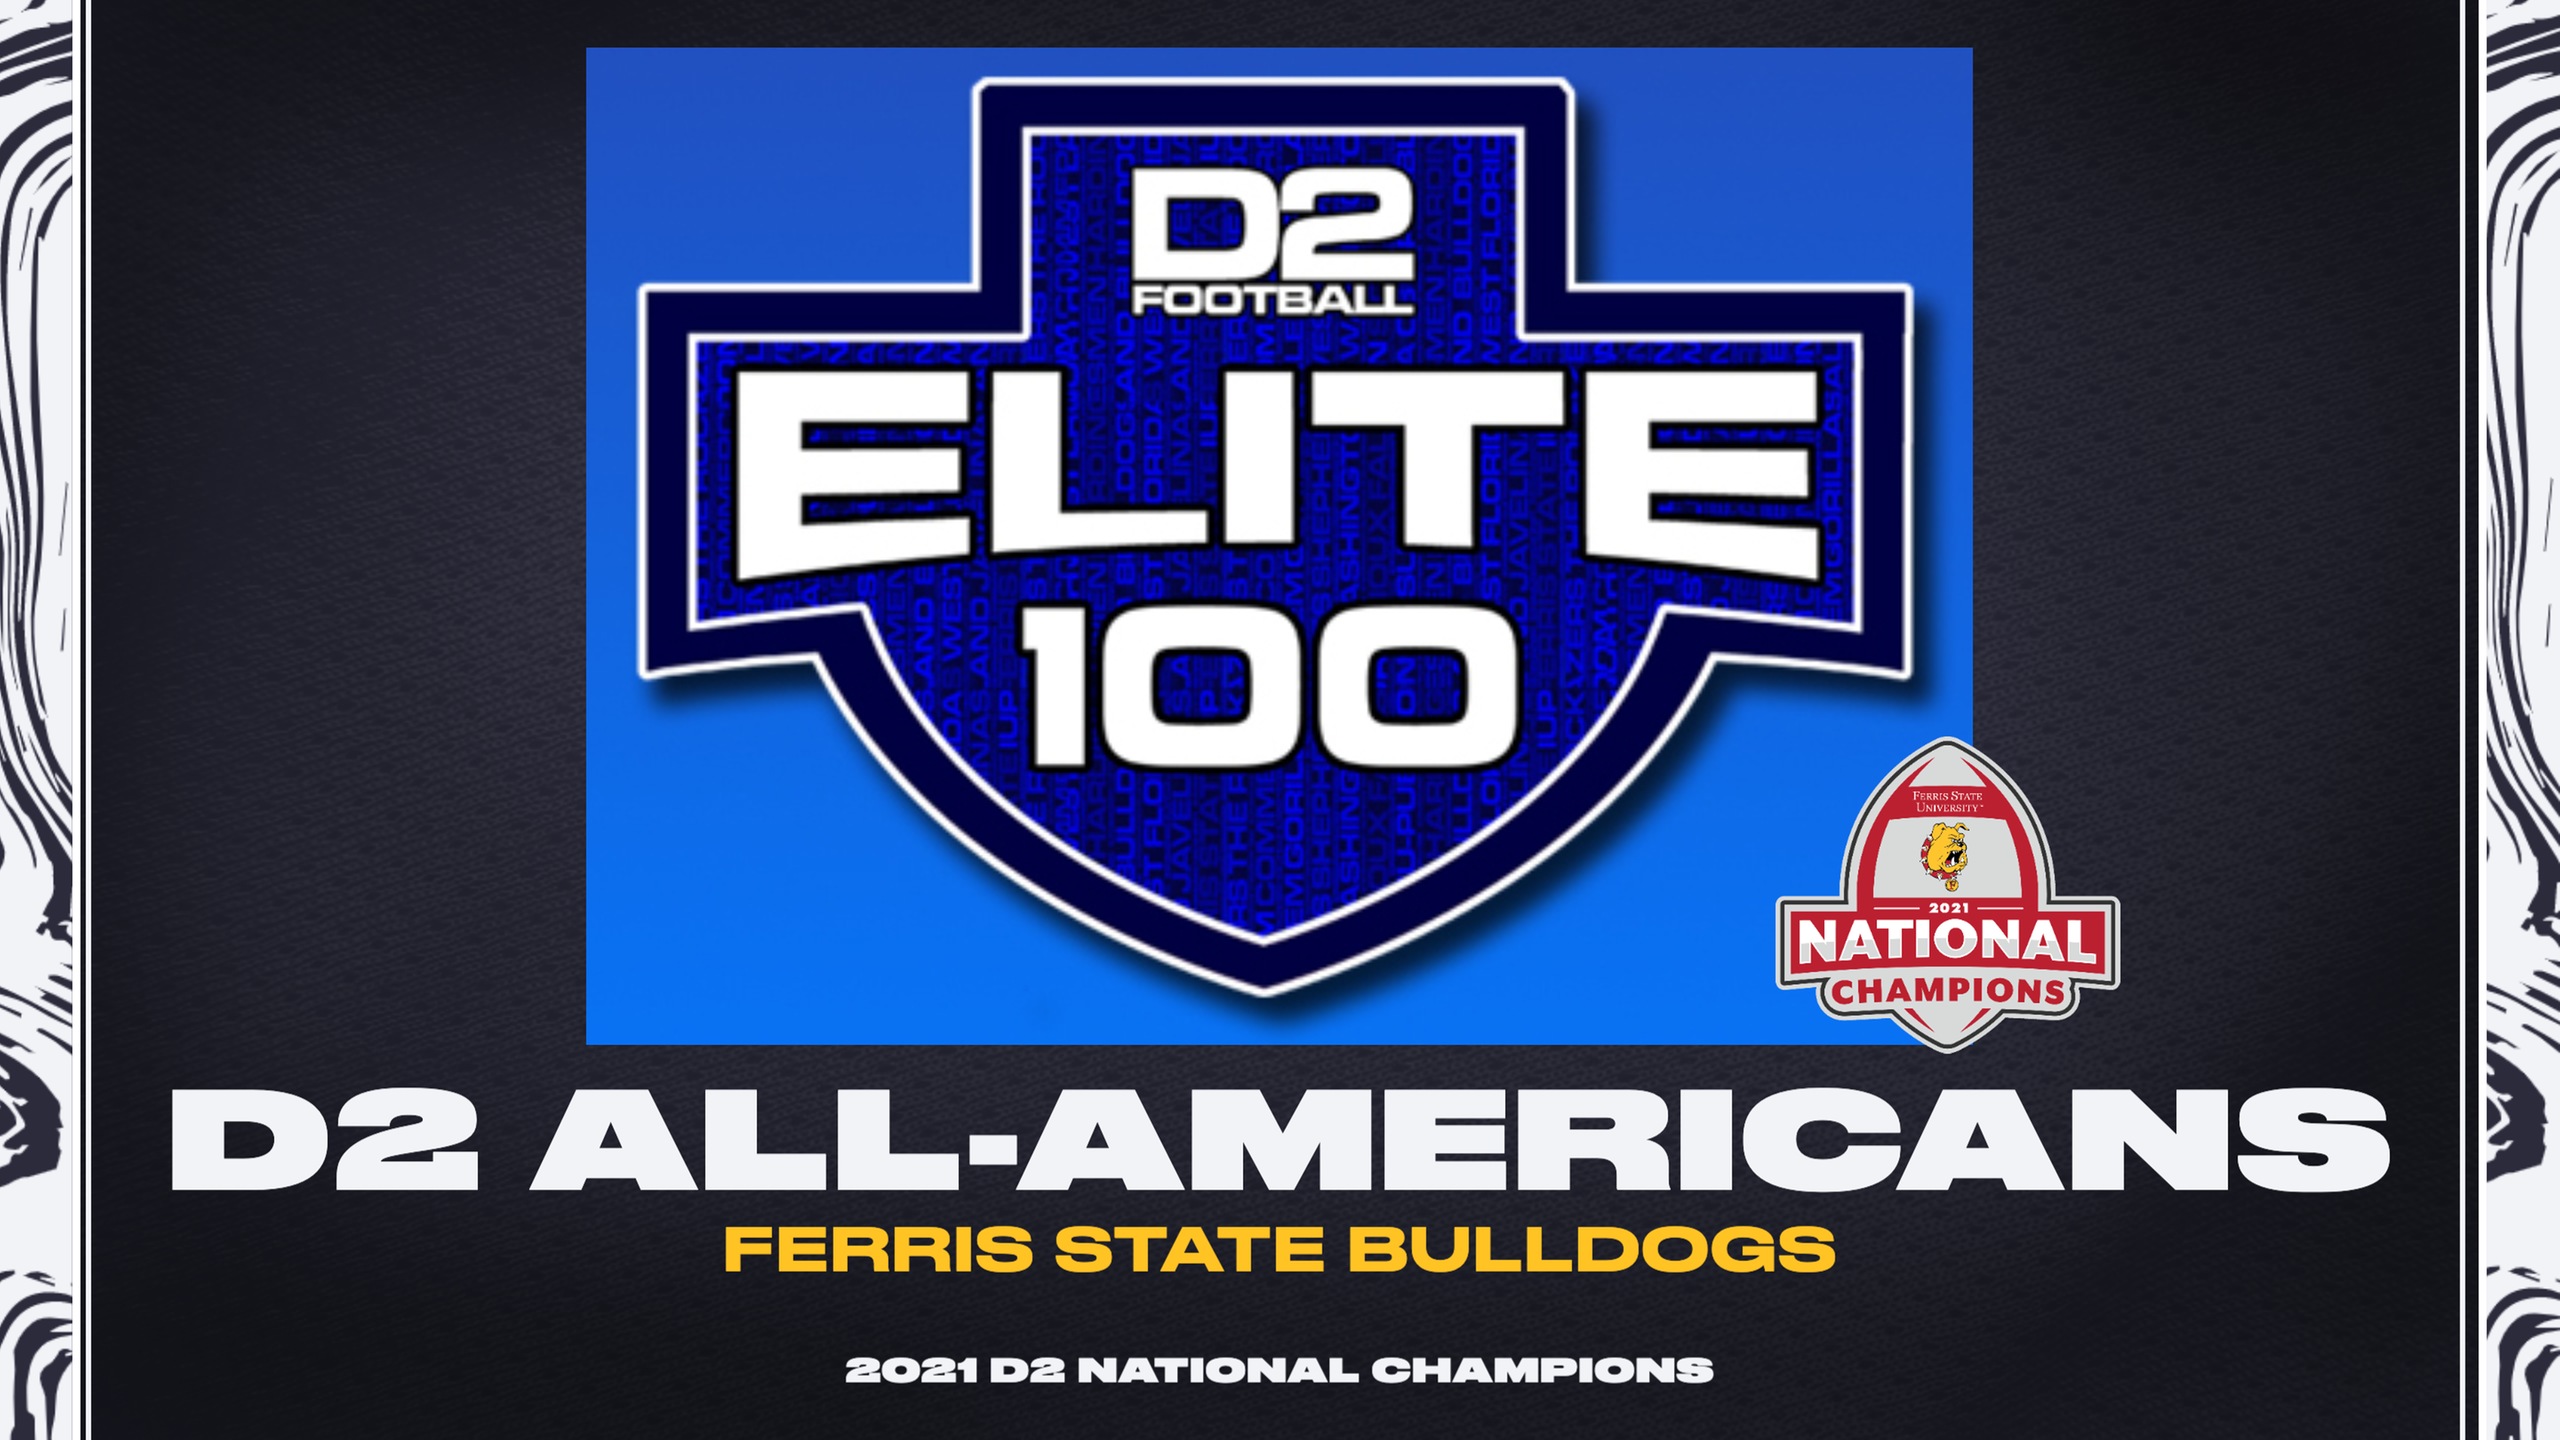 Five Ferris State National Champion Standouts Named To D2Football Elite 100 All-America Team